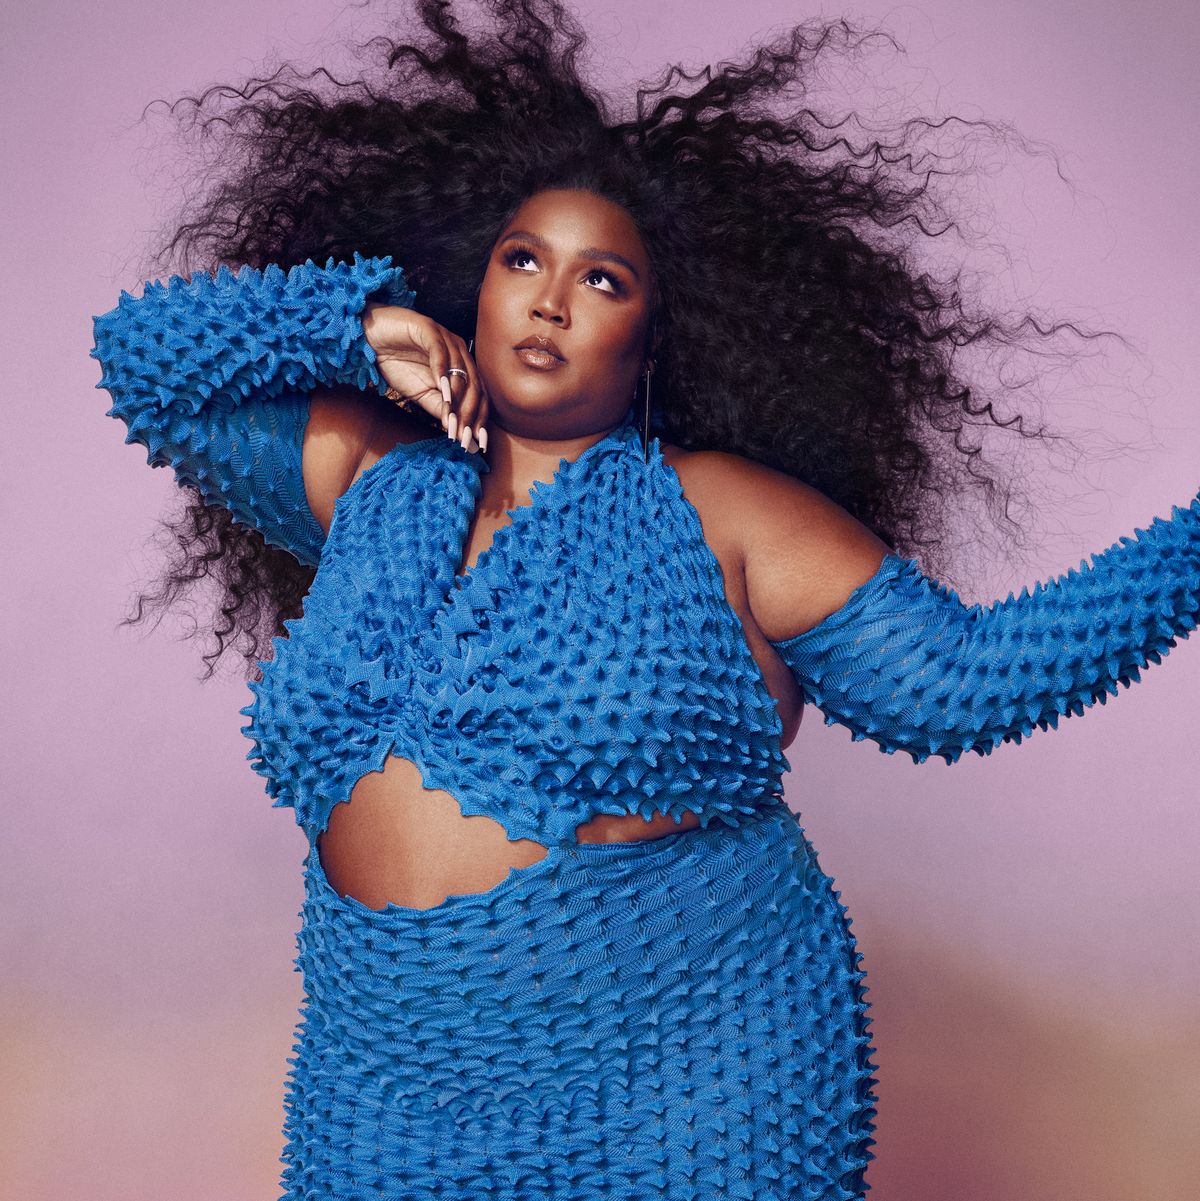 Lizzo claims new shapewear collection 'snatches and lifts' the body